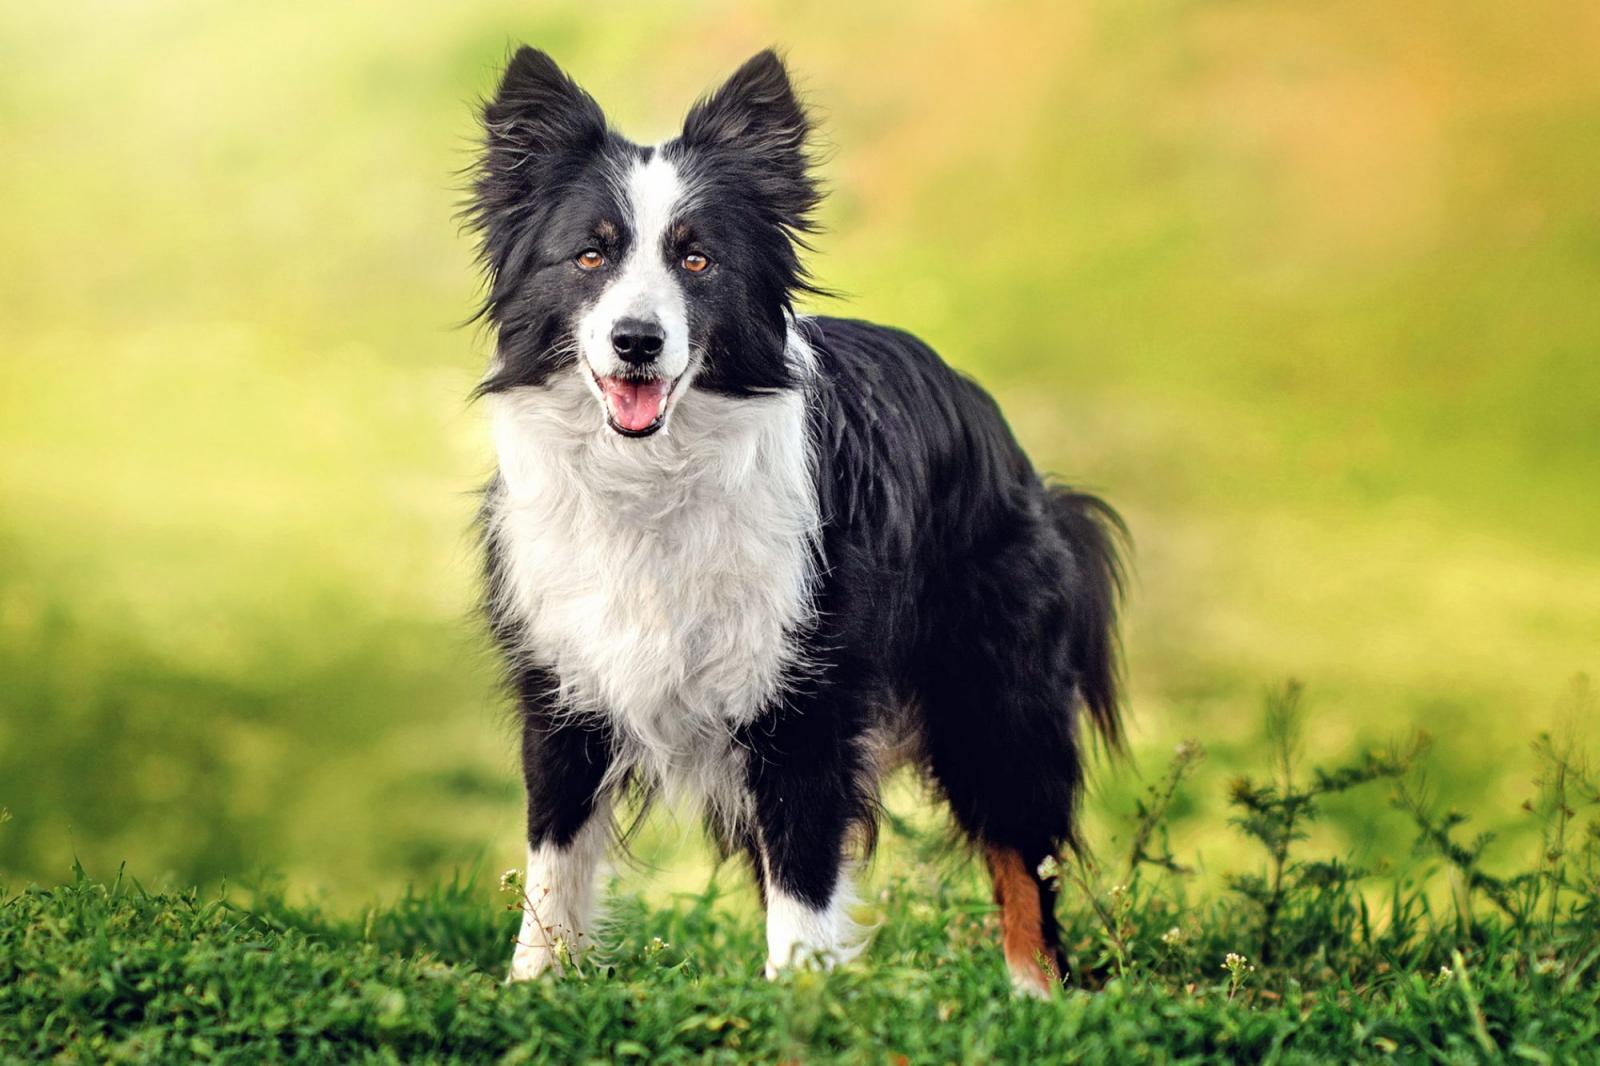 What Wild Animal Are You? Border Collie